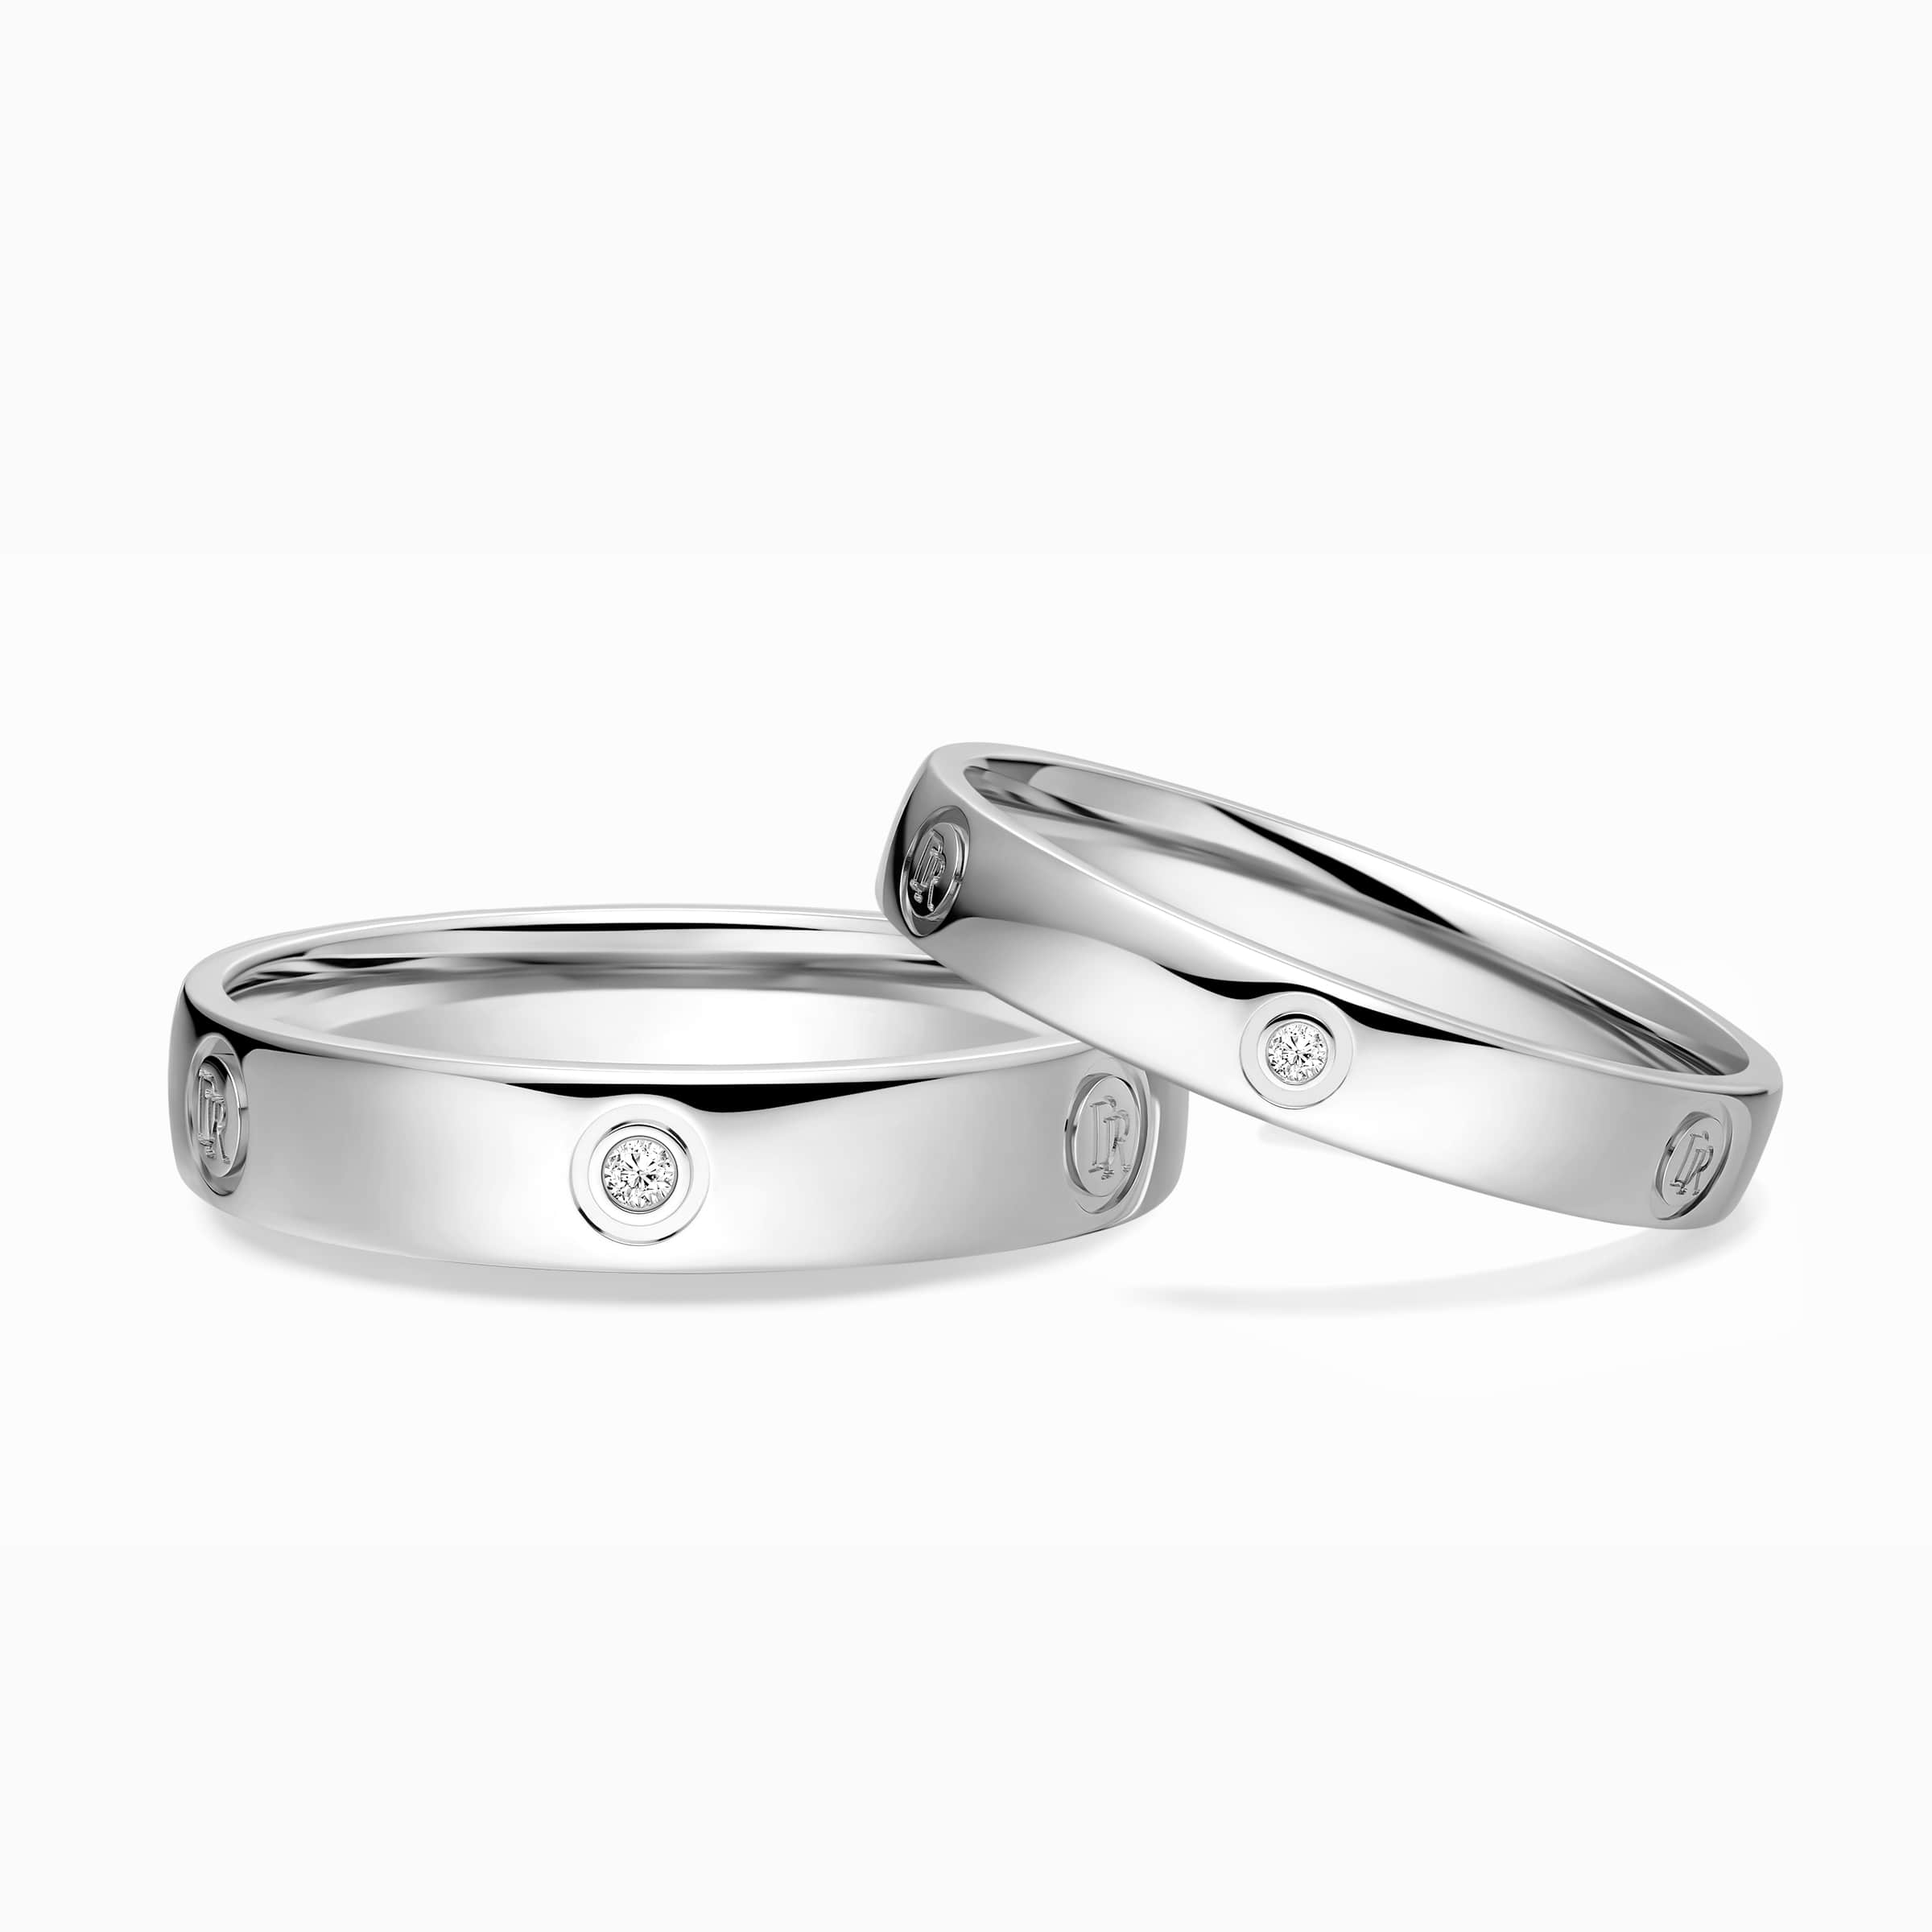 Darry Ring signature wedding rings in white gold